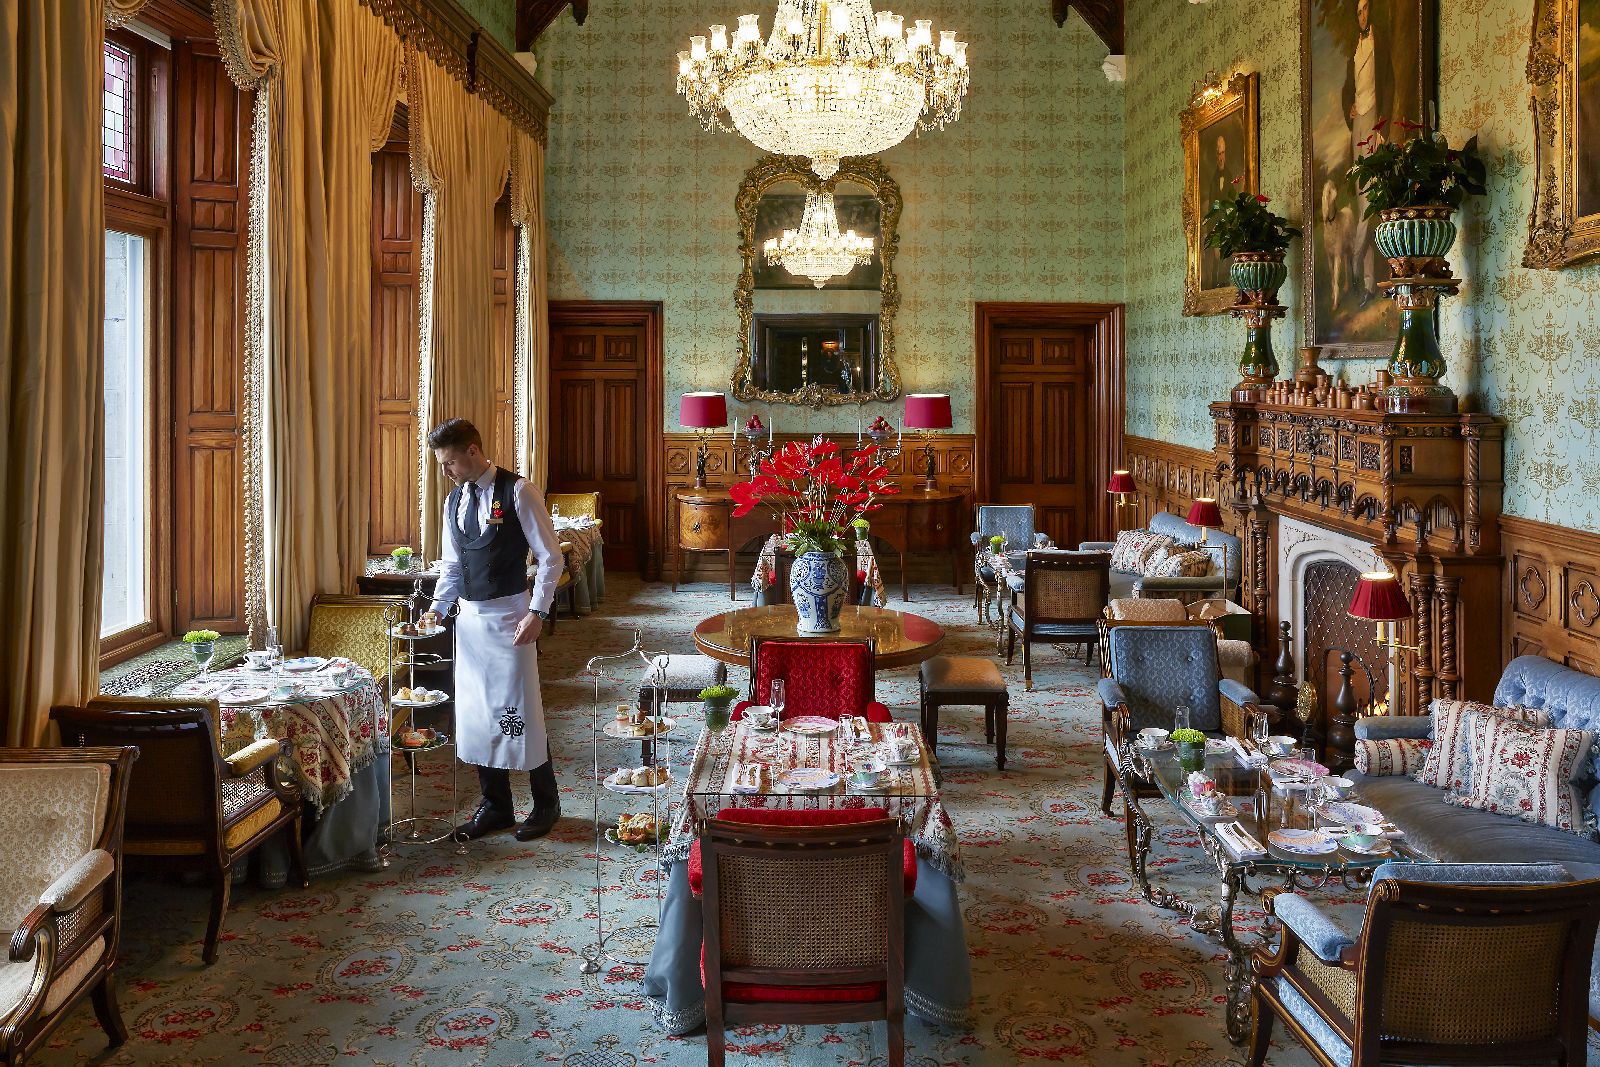 Elaborate afternoon tea service at Ashford Castle in County Mayo Ireland